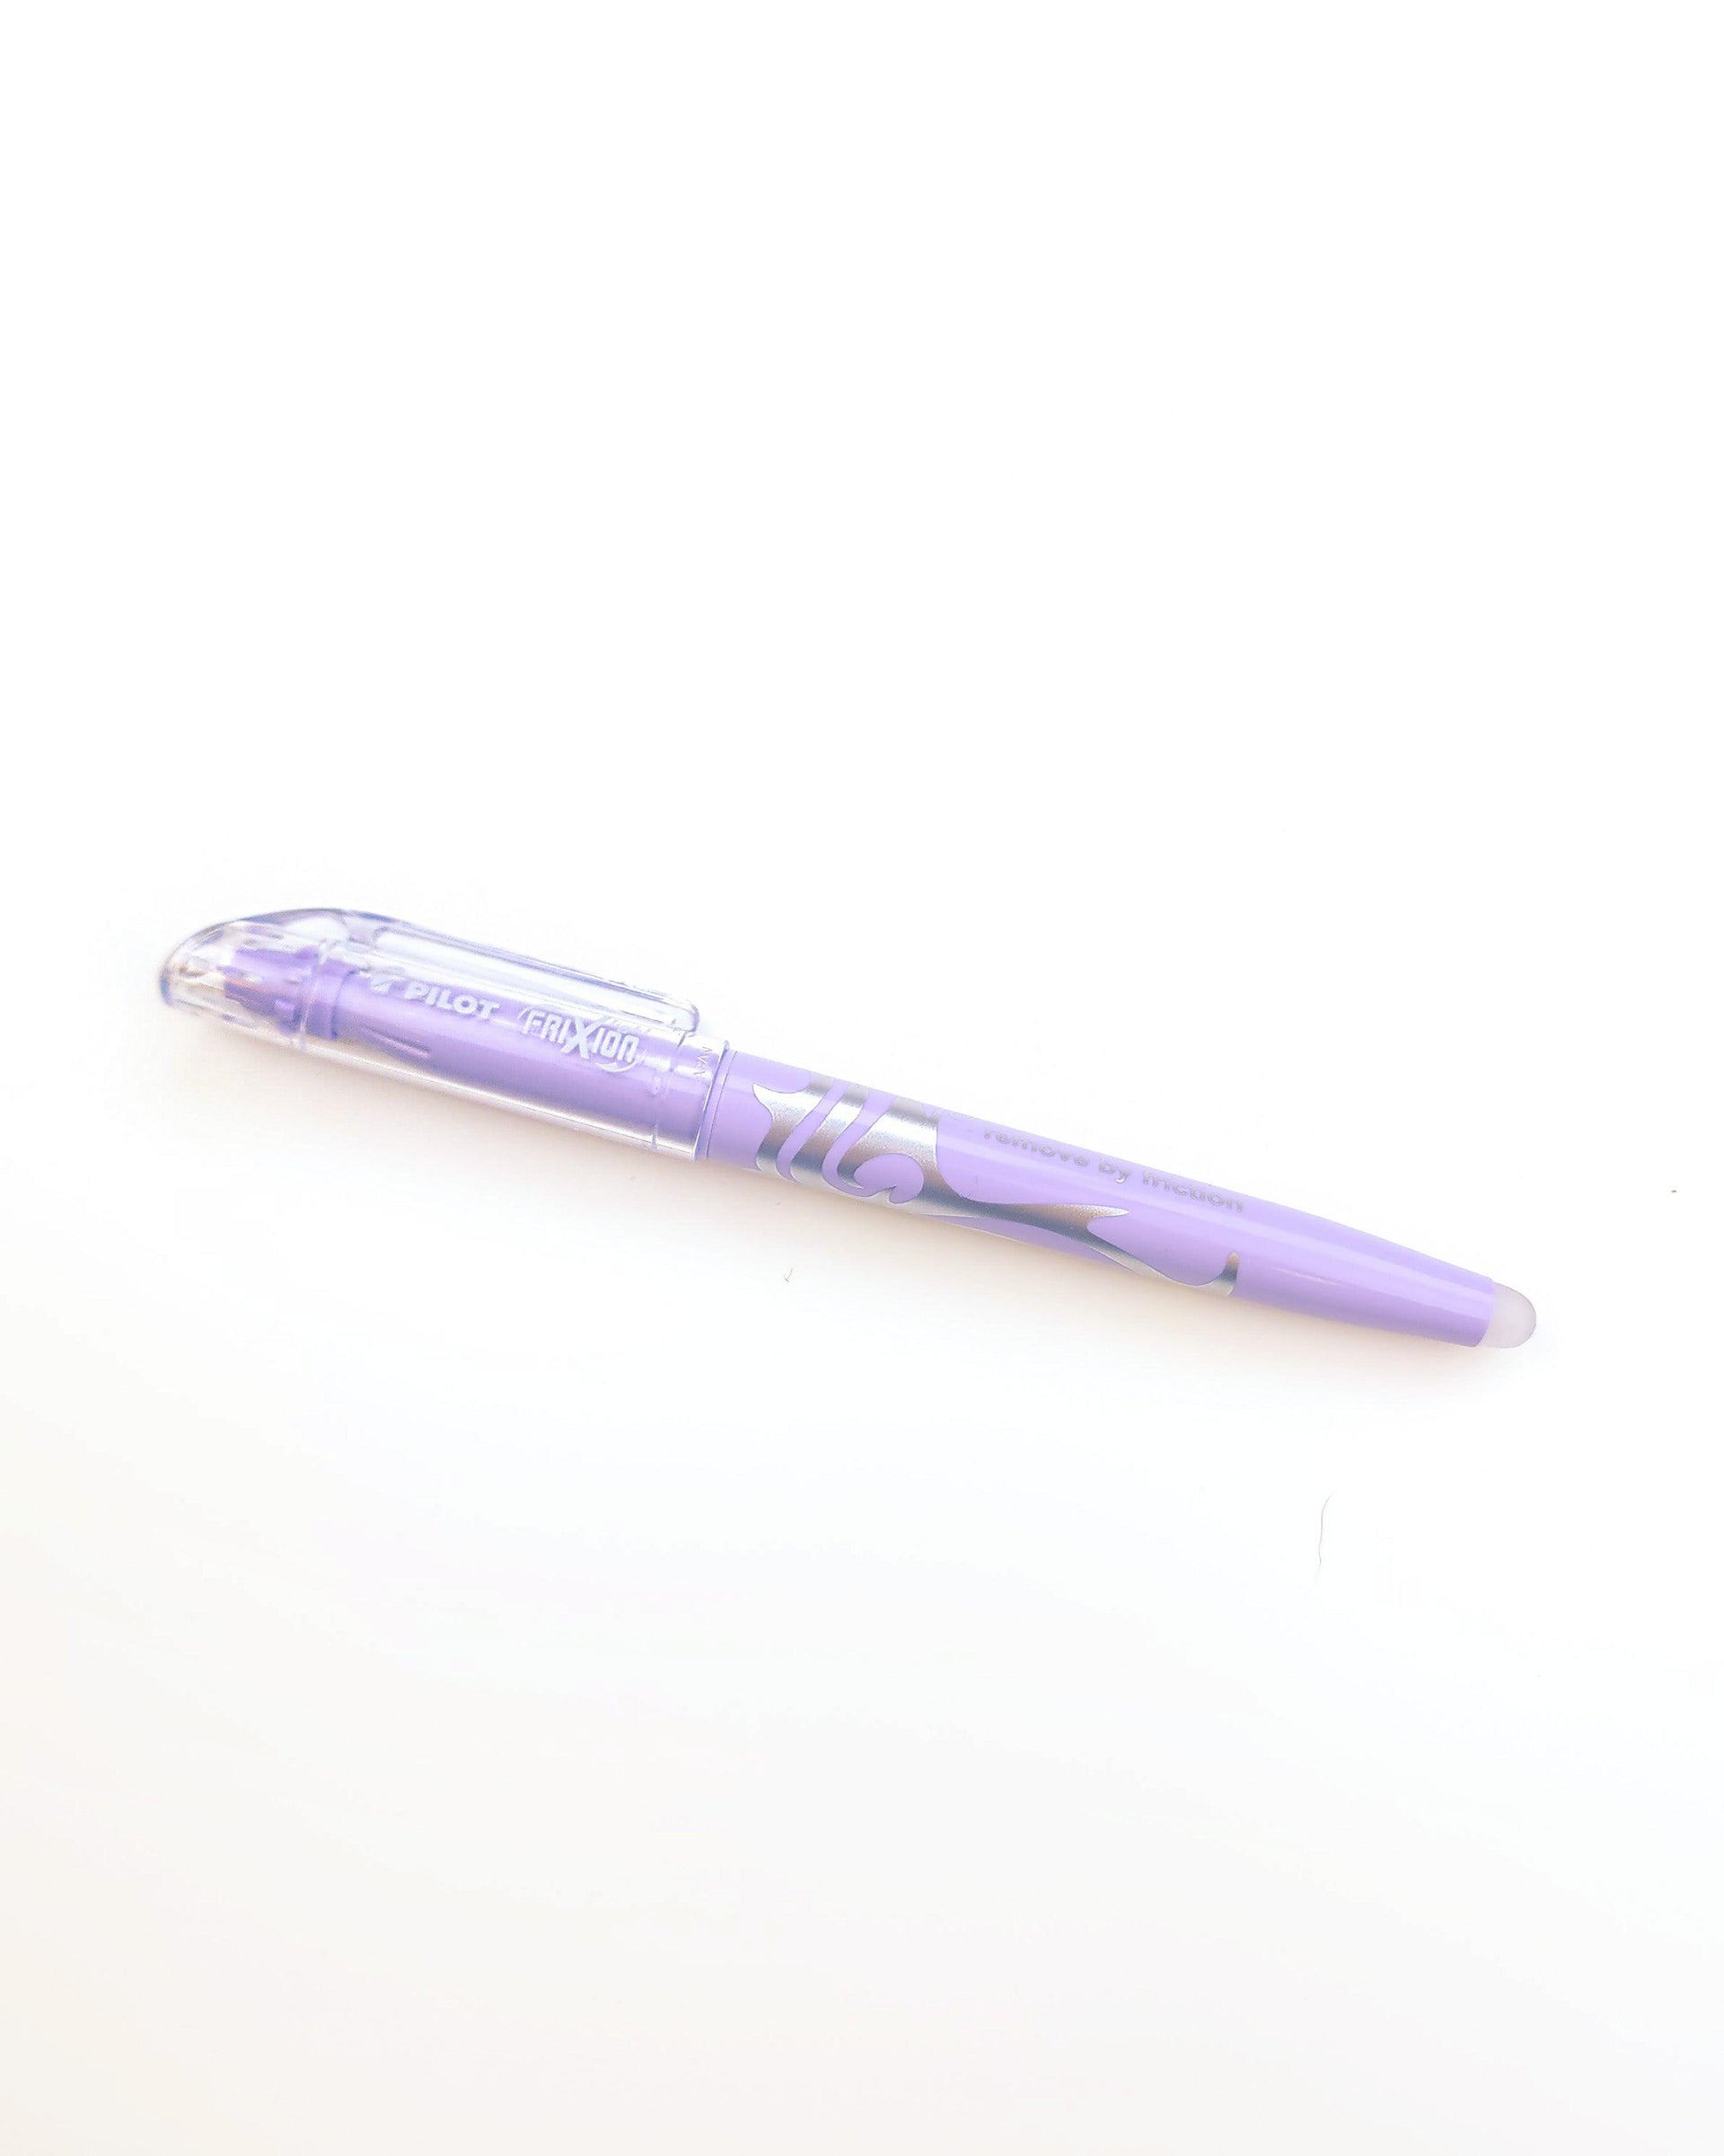 Soft violet Frixion erasable highlighter marker for note taking and editing in your six ring or discbound planner by Jane's Agenda.